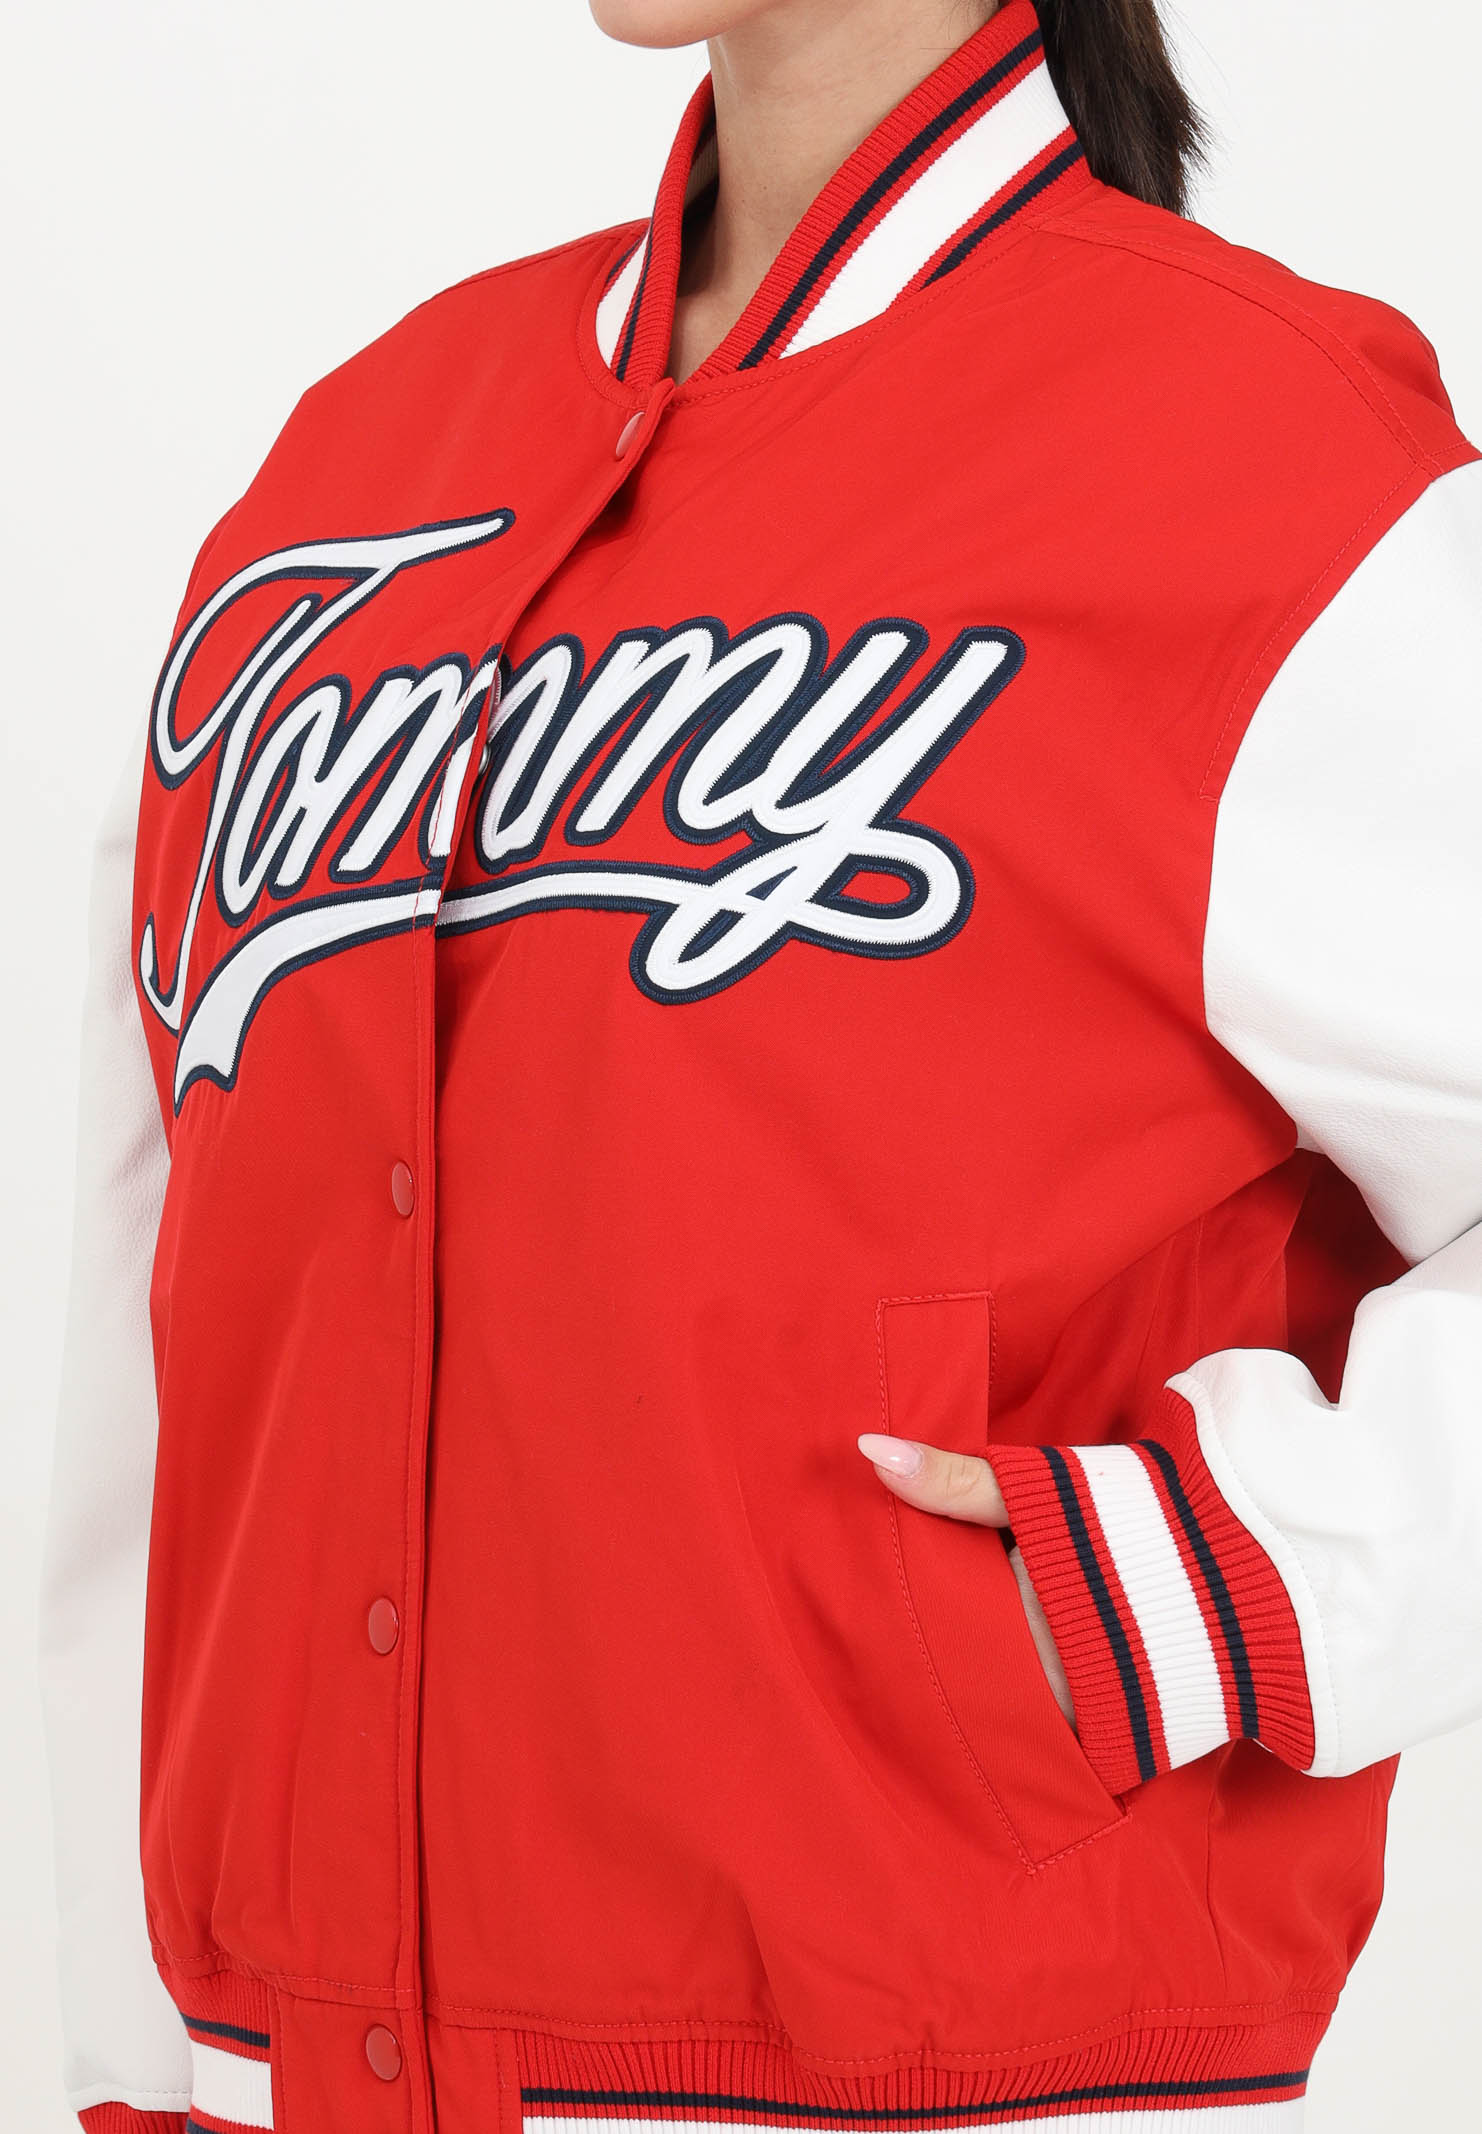 Giacca in stile college rosso e bianco da donna TOMMY JEANS | DW0DW17233XNLXNL